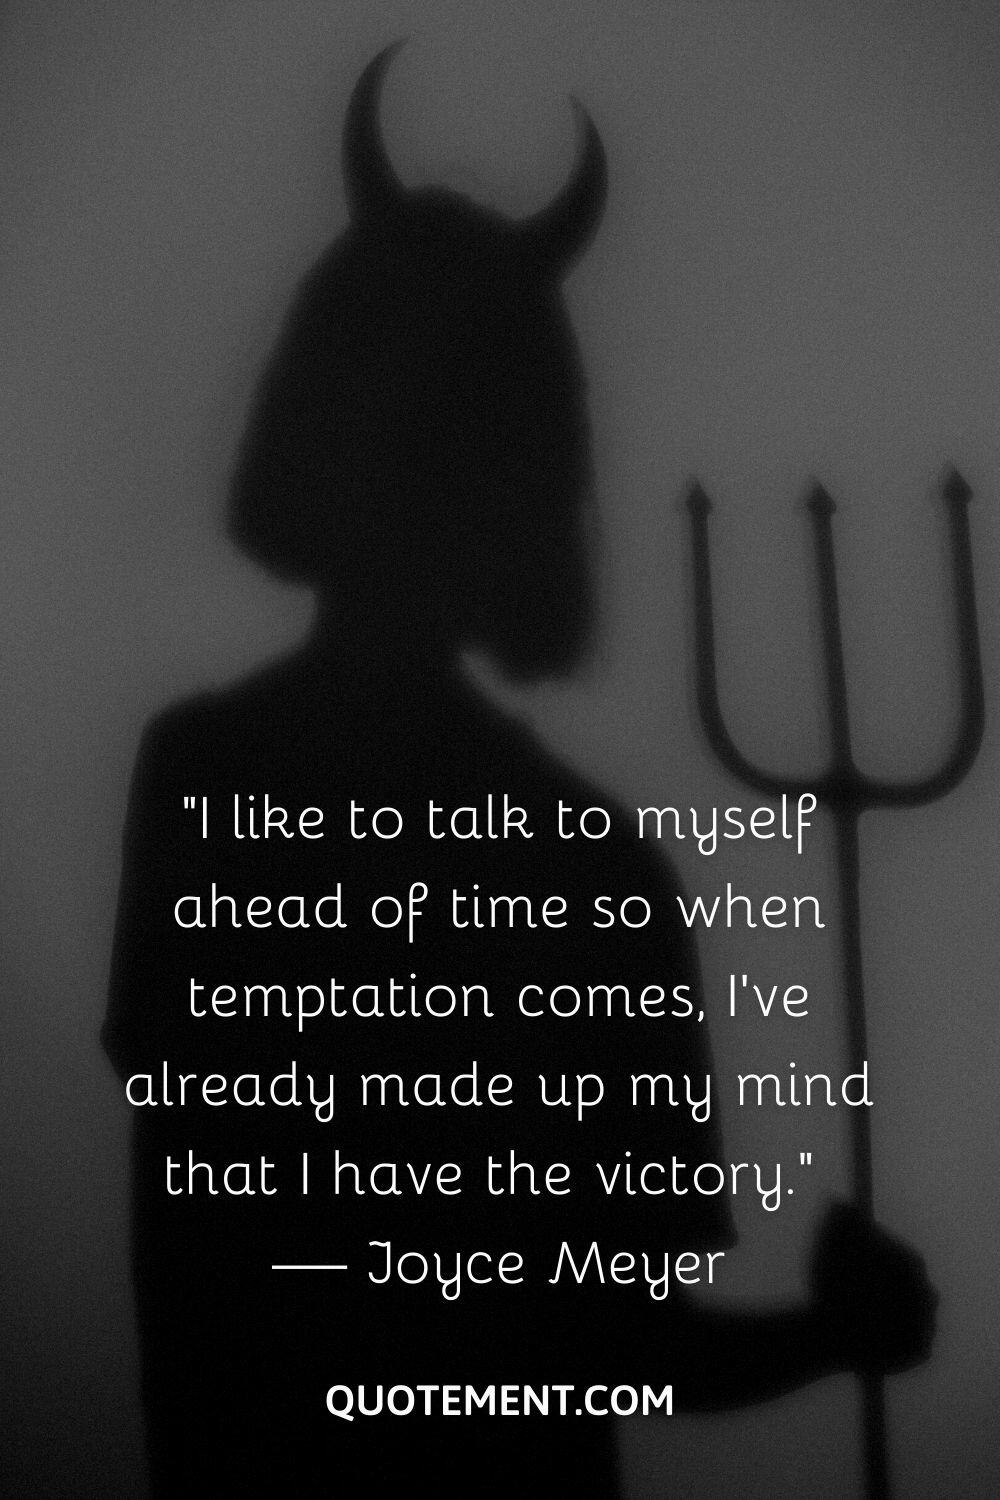 “I like to talk to myself ahead of time so when temptation comes, I've already made up my mind that I have the victory.” — Joyce Meyer